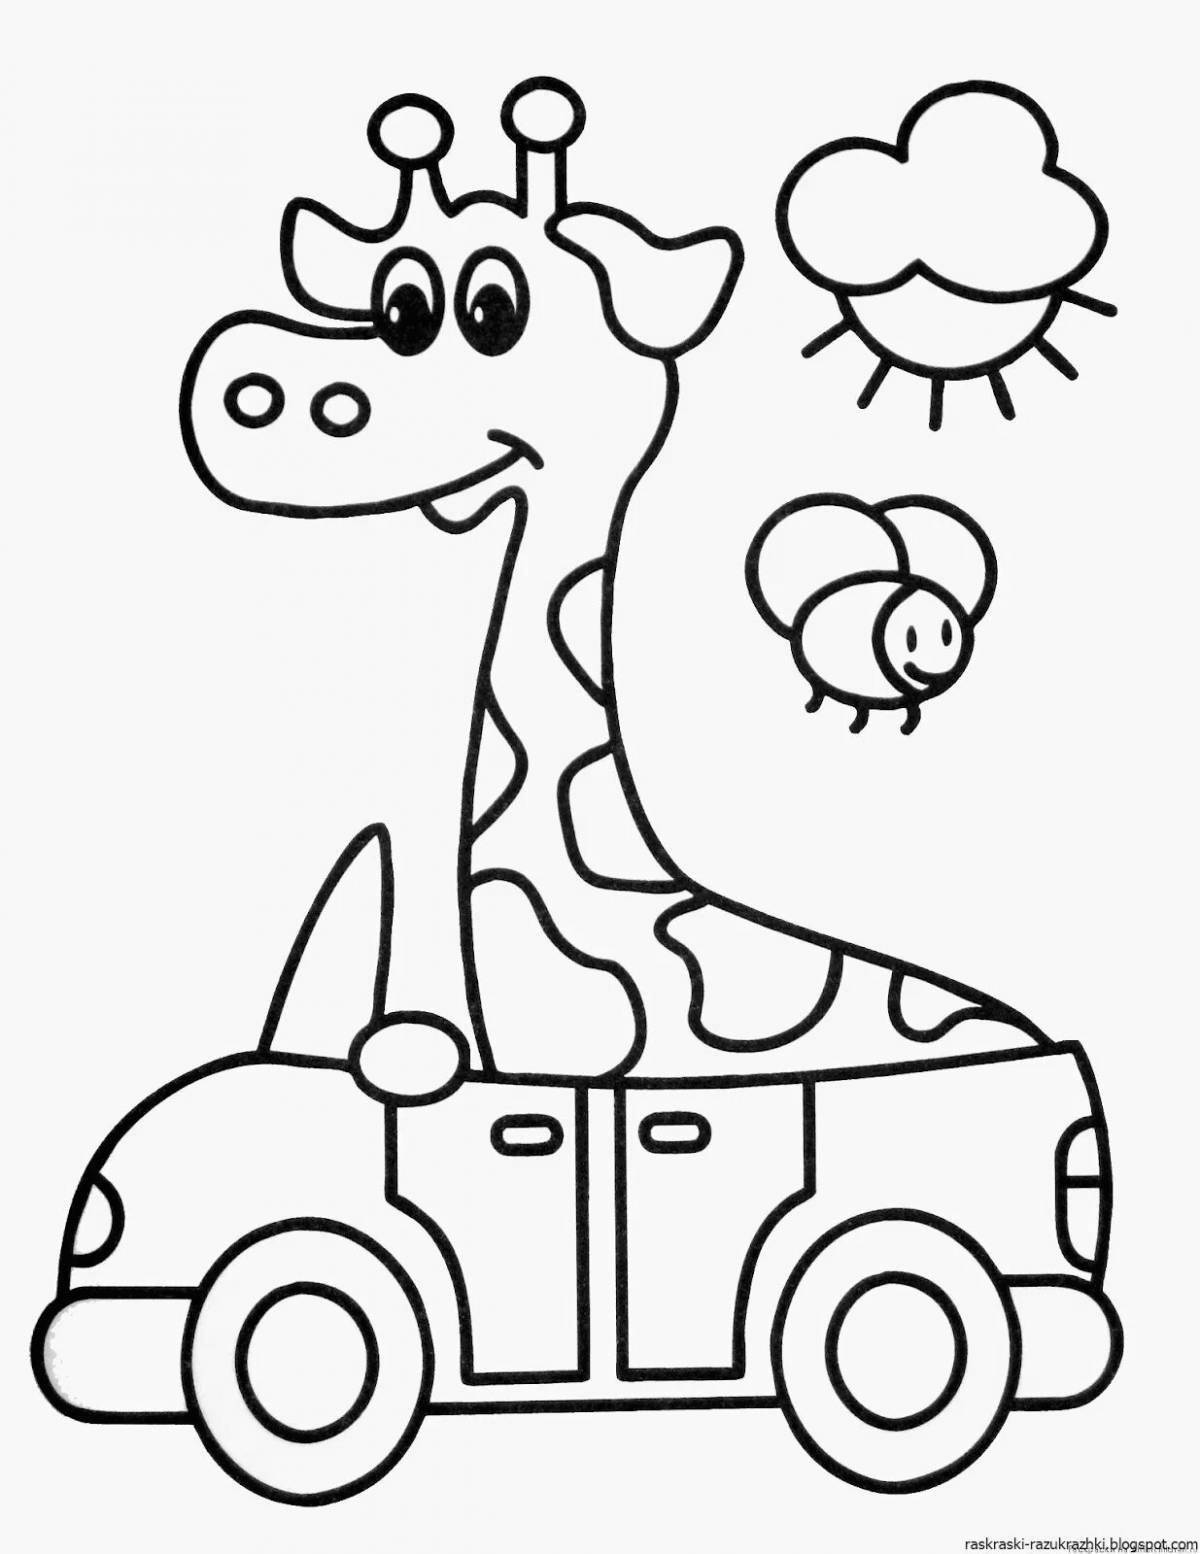 Coloring game gentle cars for boys 4-5 years old